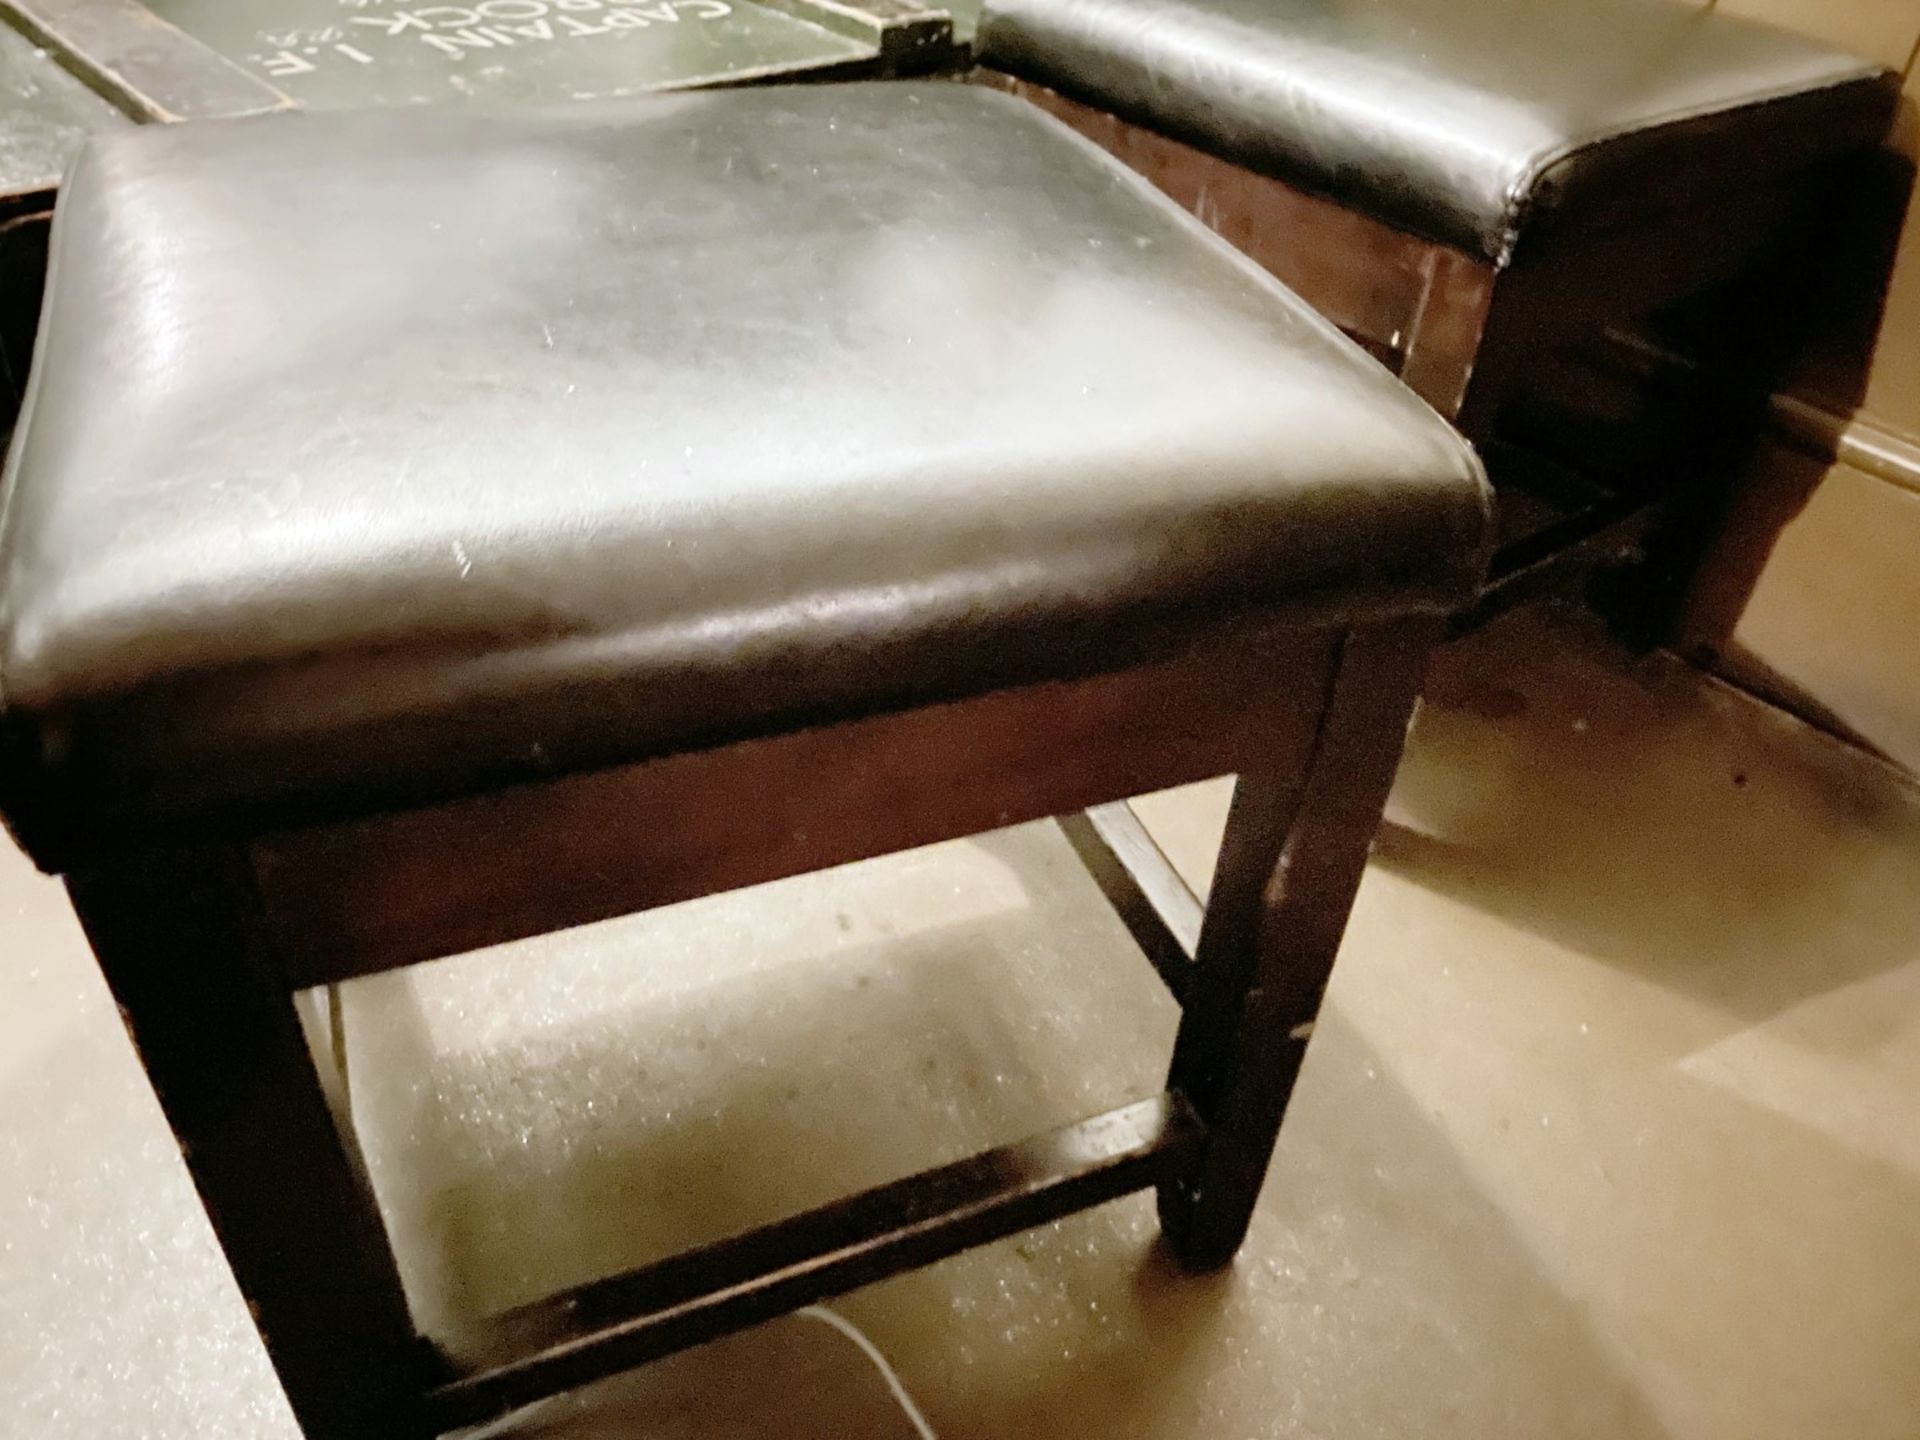 Pair of Mid 19th Century-style Wooden Rectangular Stools with Black Leather Upholstered Seats